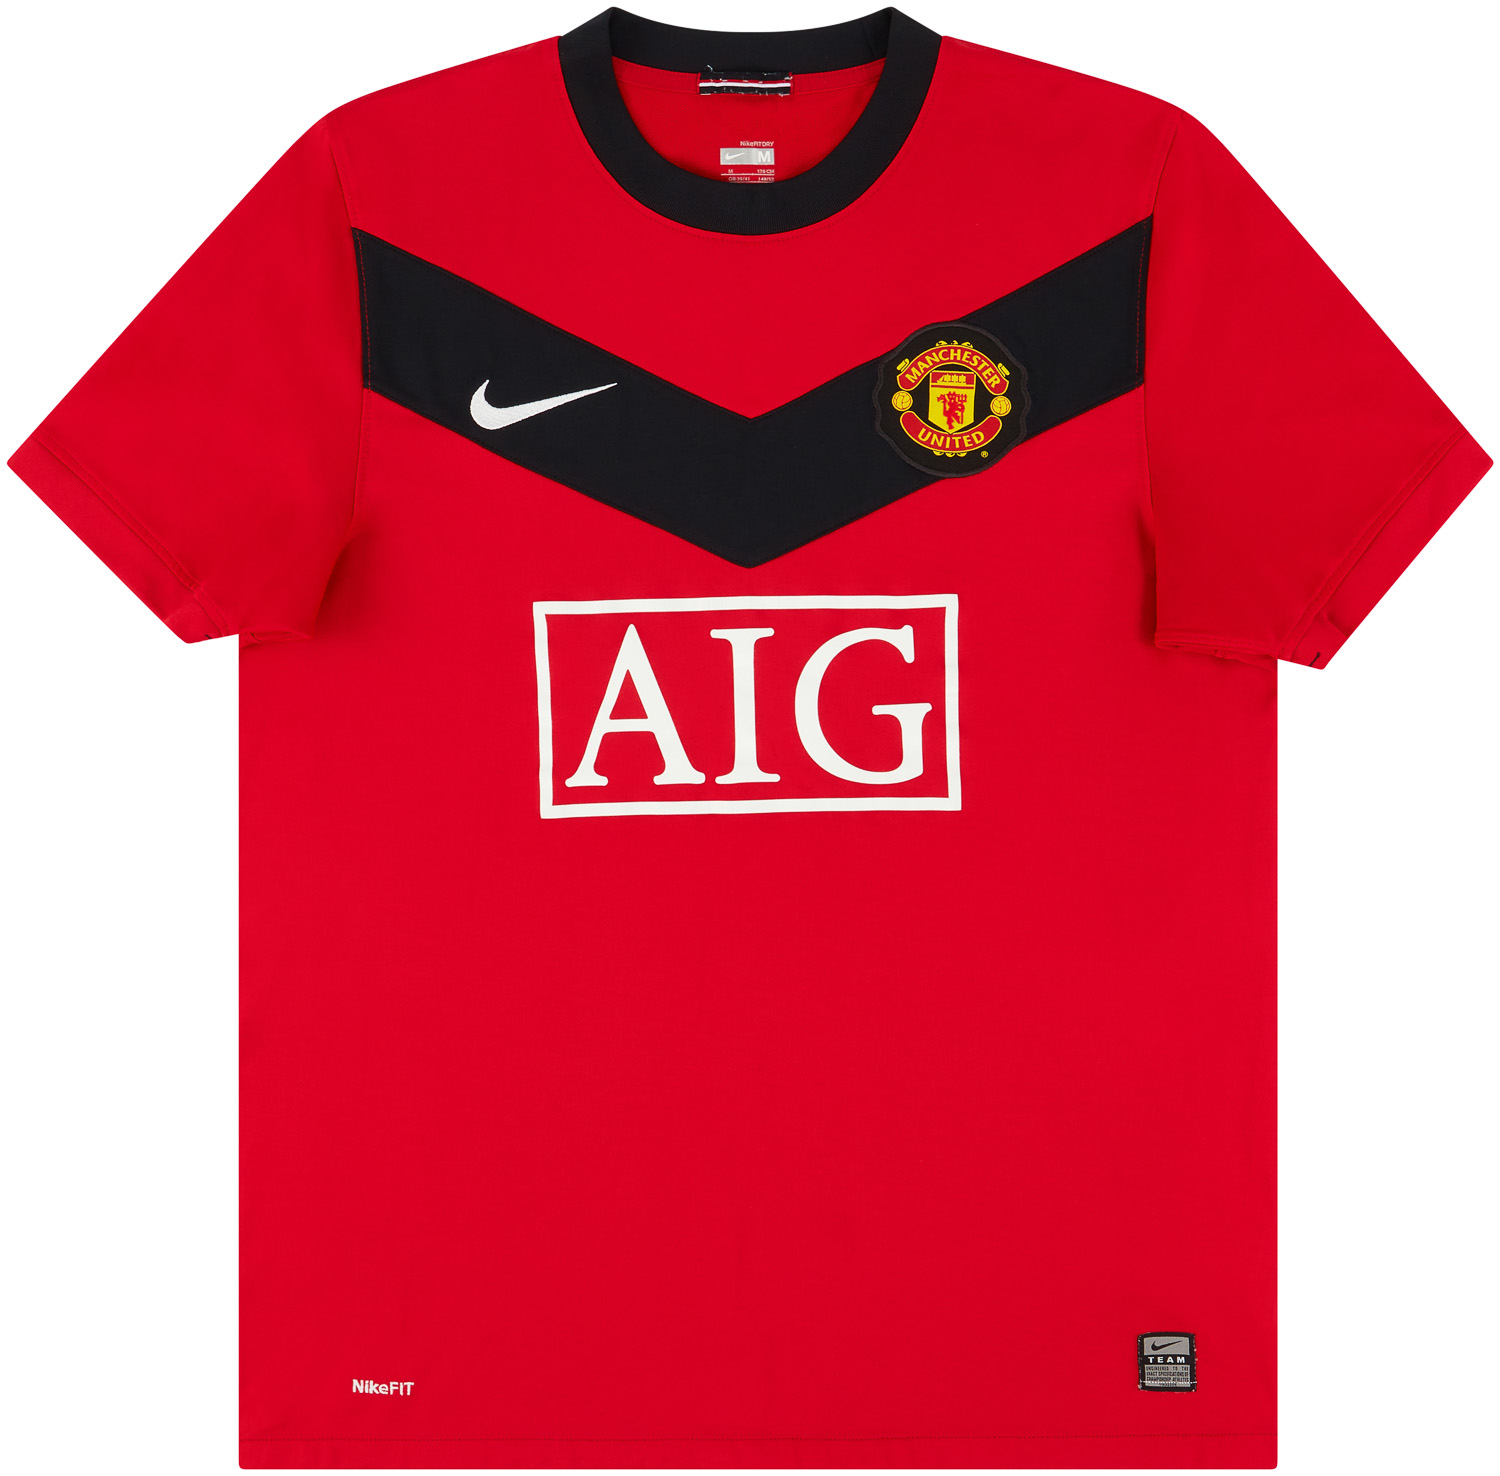 2009-10 Manchester United Home Shirt - 7/10 -